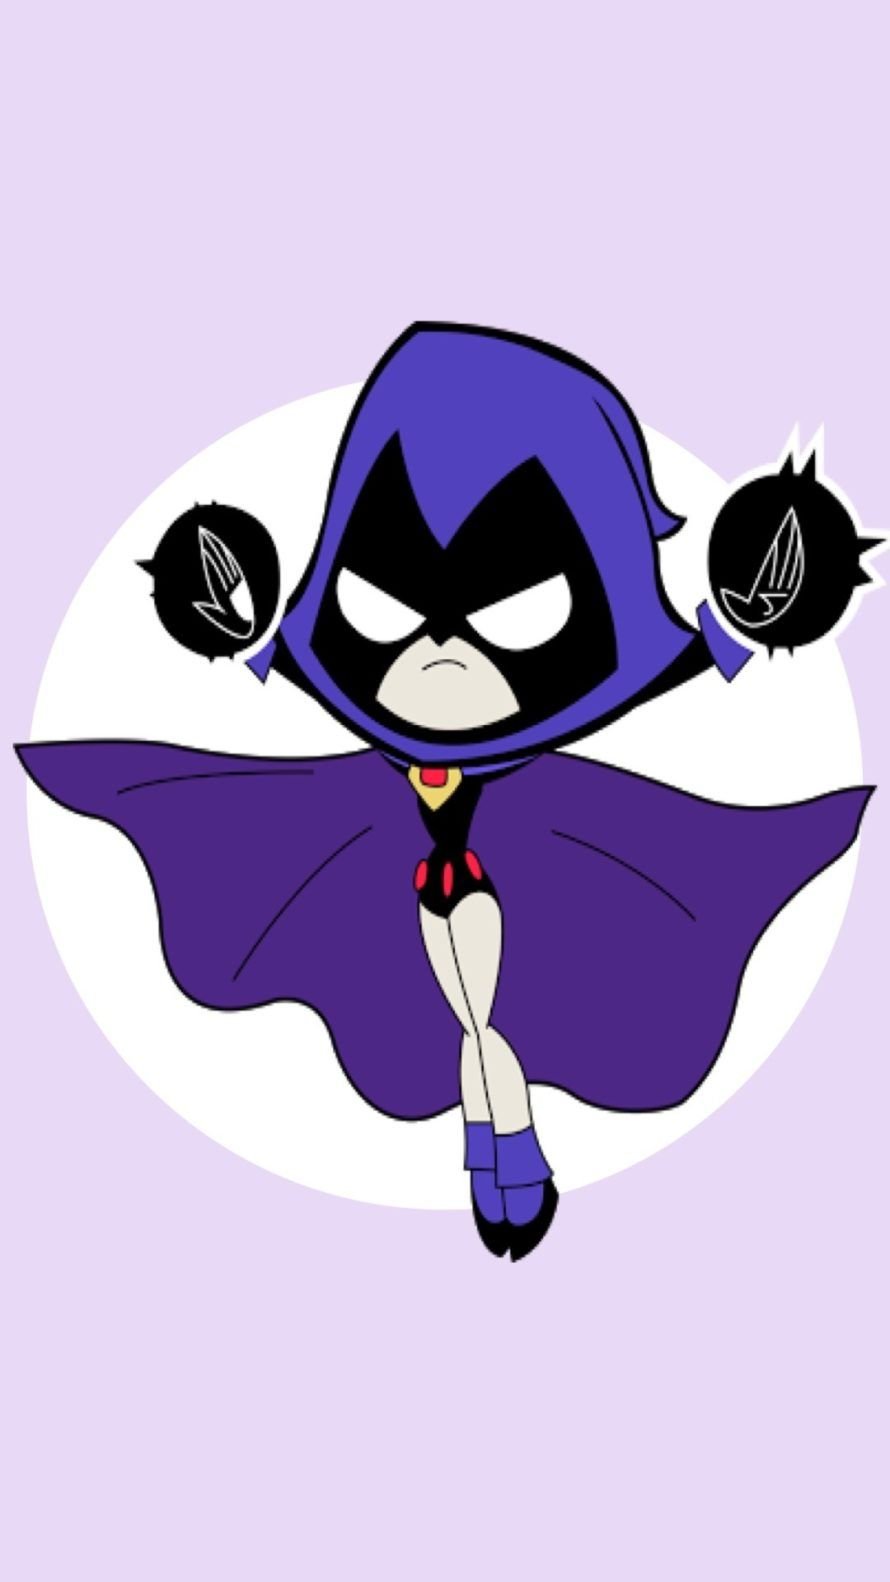 Teen titans go characters Wallpapers Download | MobCup